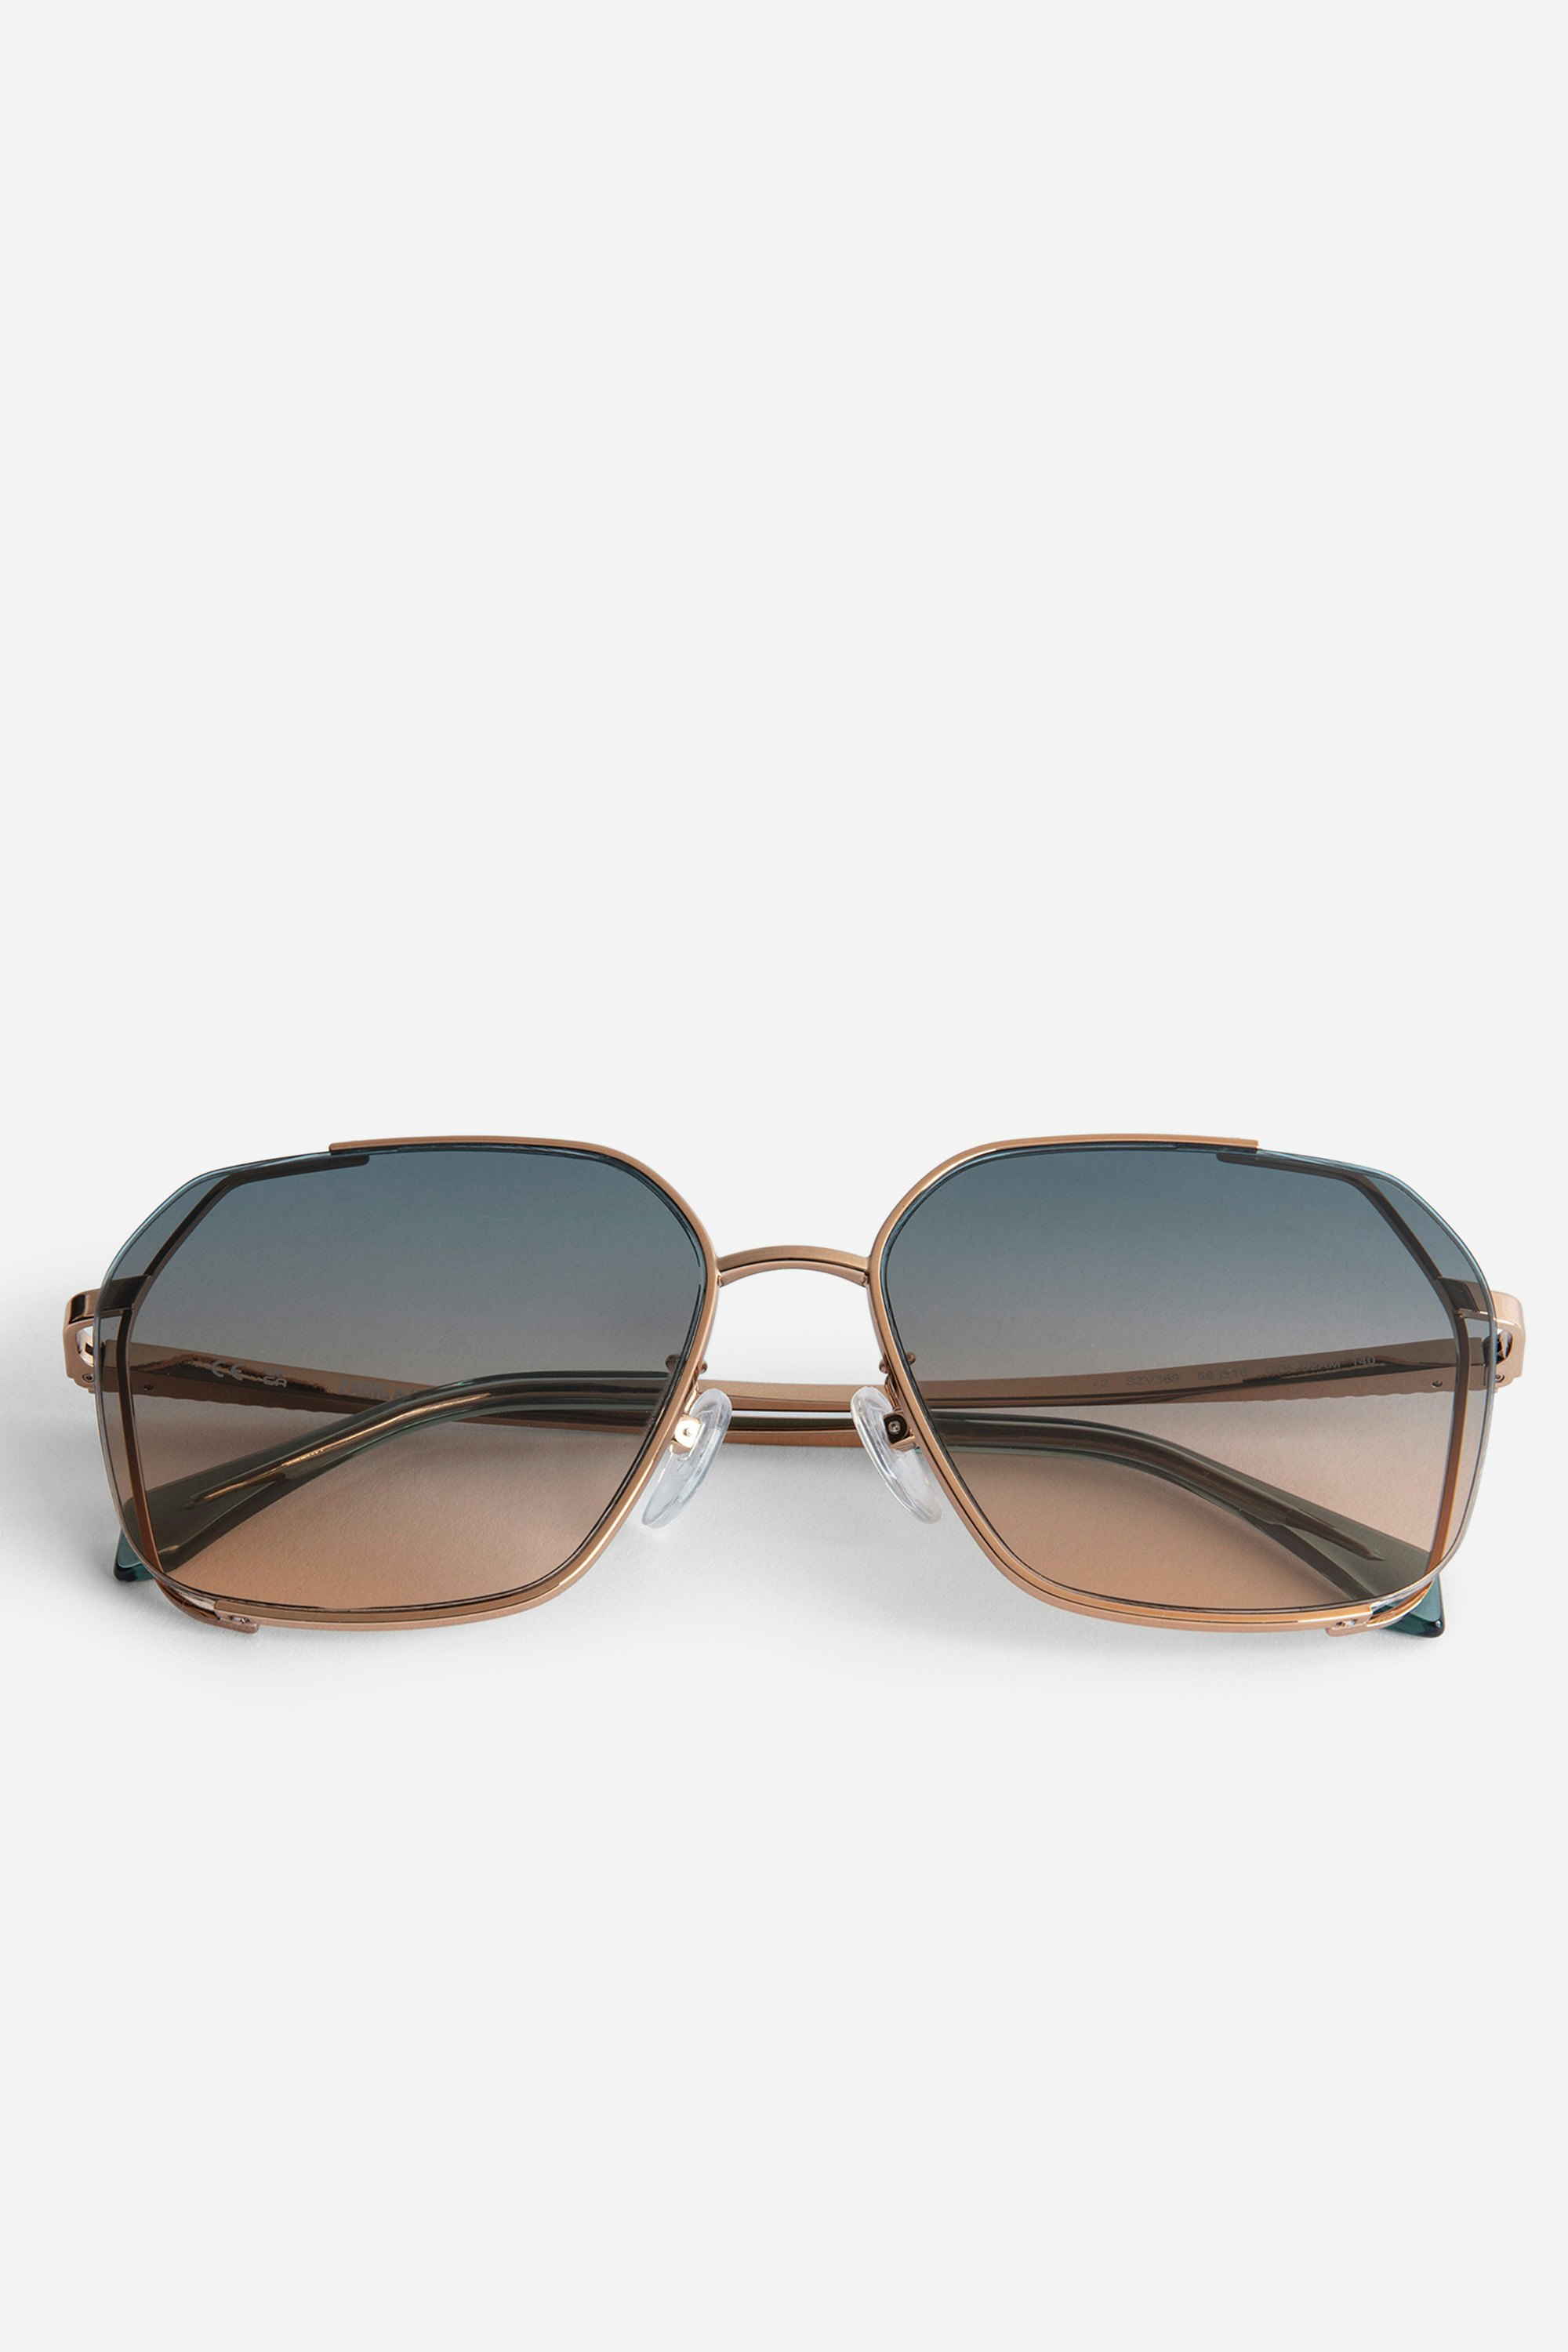 ZV23H5 Sunglasses Unisex green rounded square sunglasses with the ZV logo on the temples.